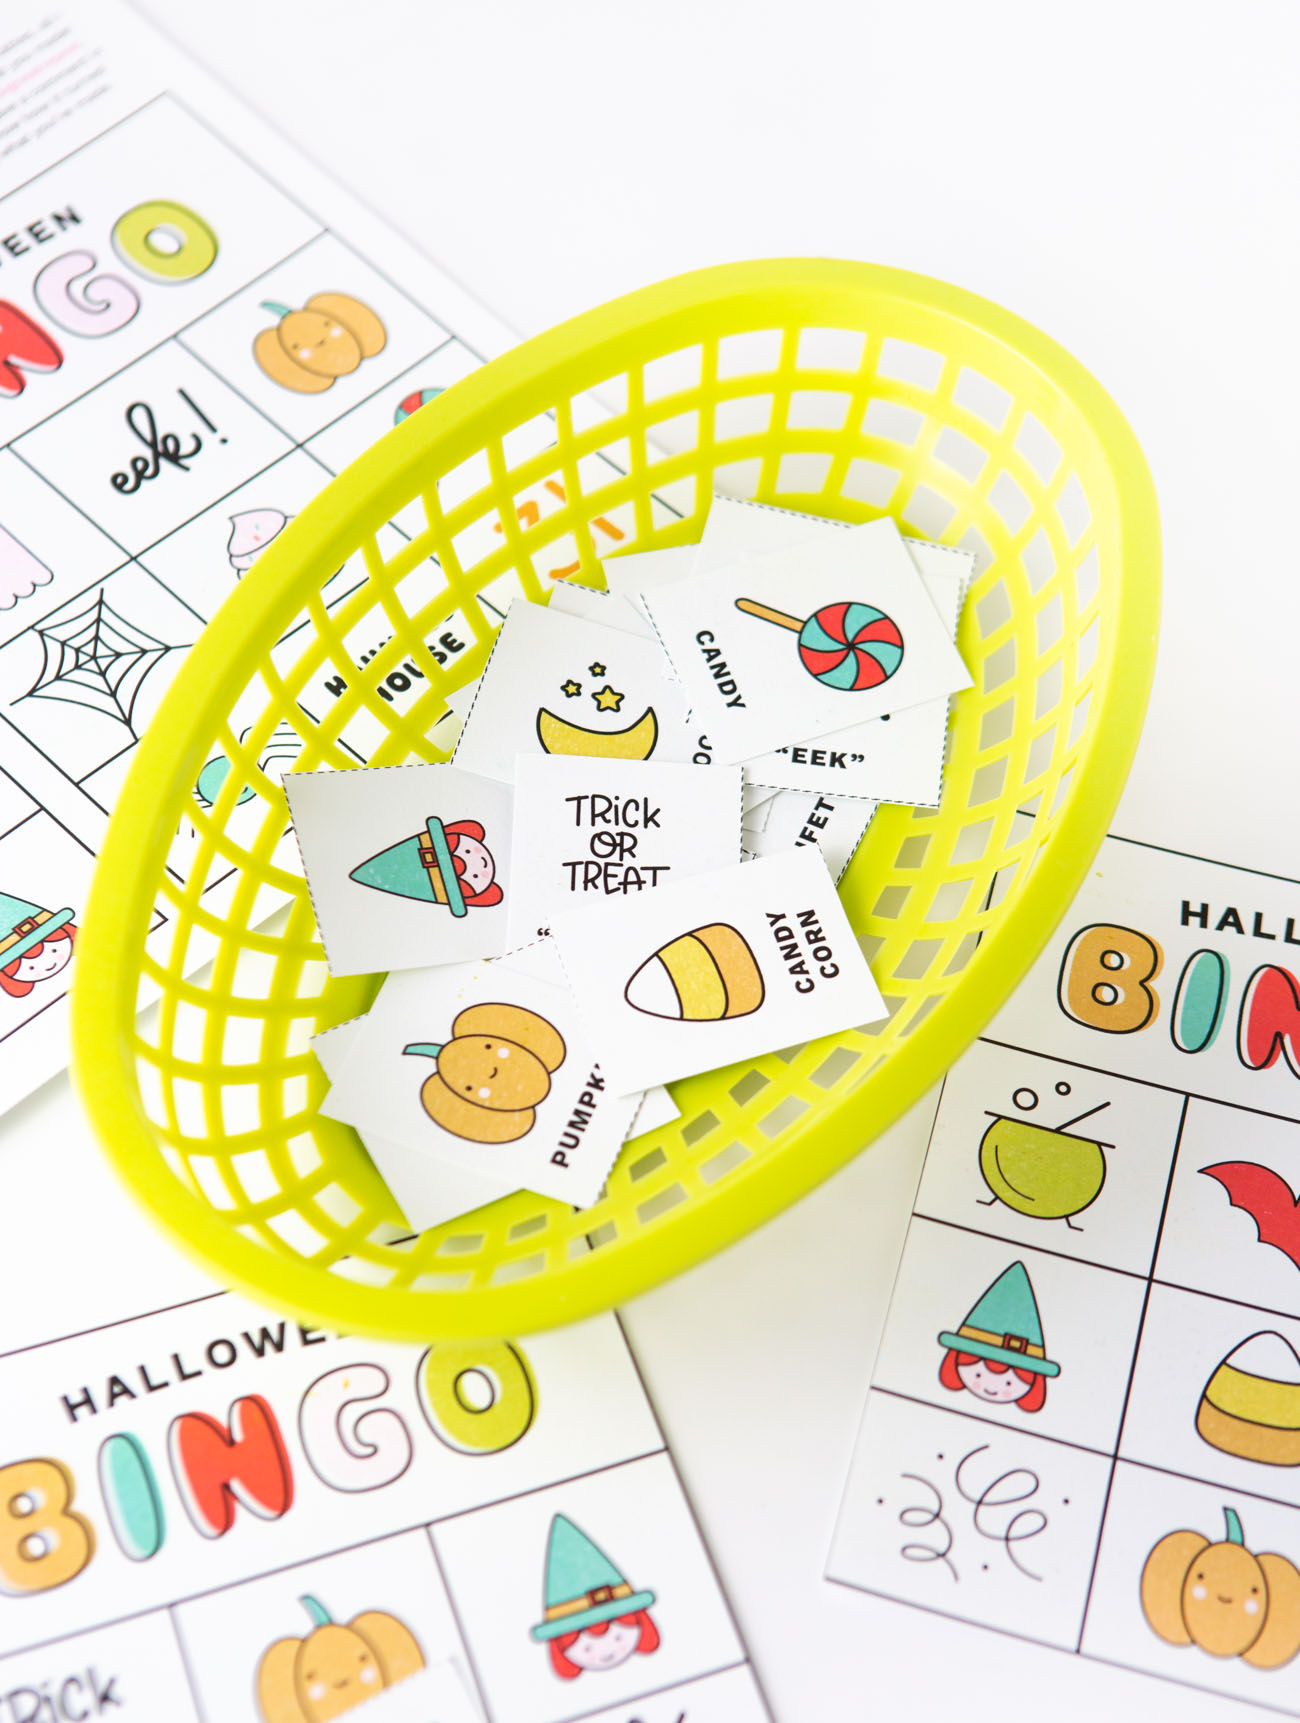 Basket of Halloween bingo cards calling cards with icons and pictures: pumpkin, witch, lollipop, cauldron, spider, ghost